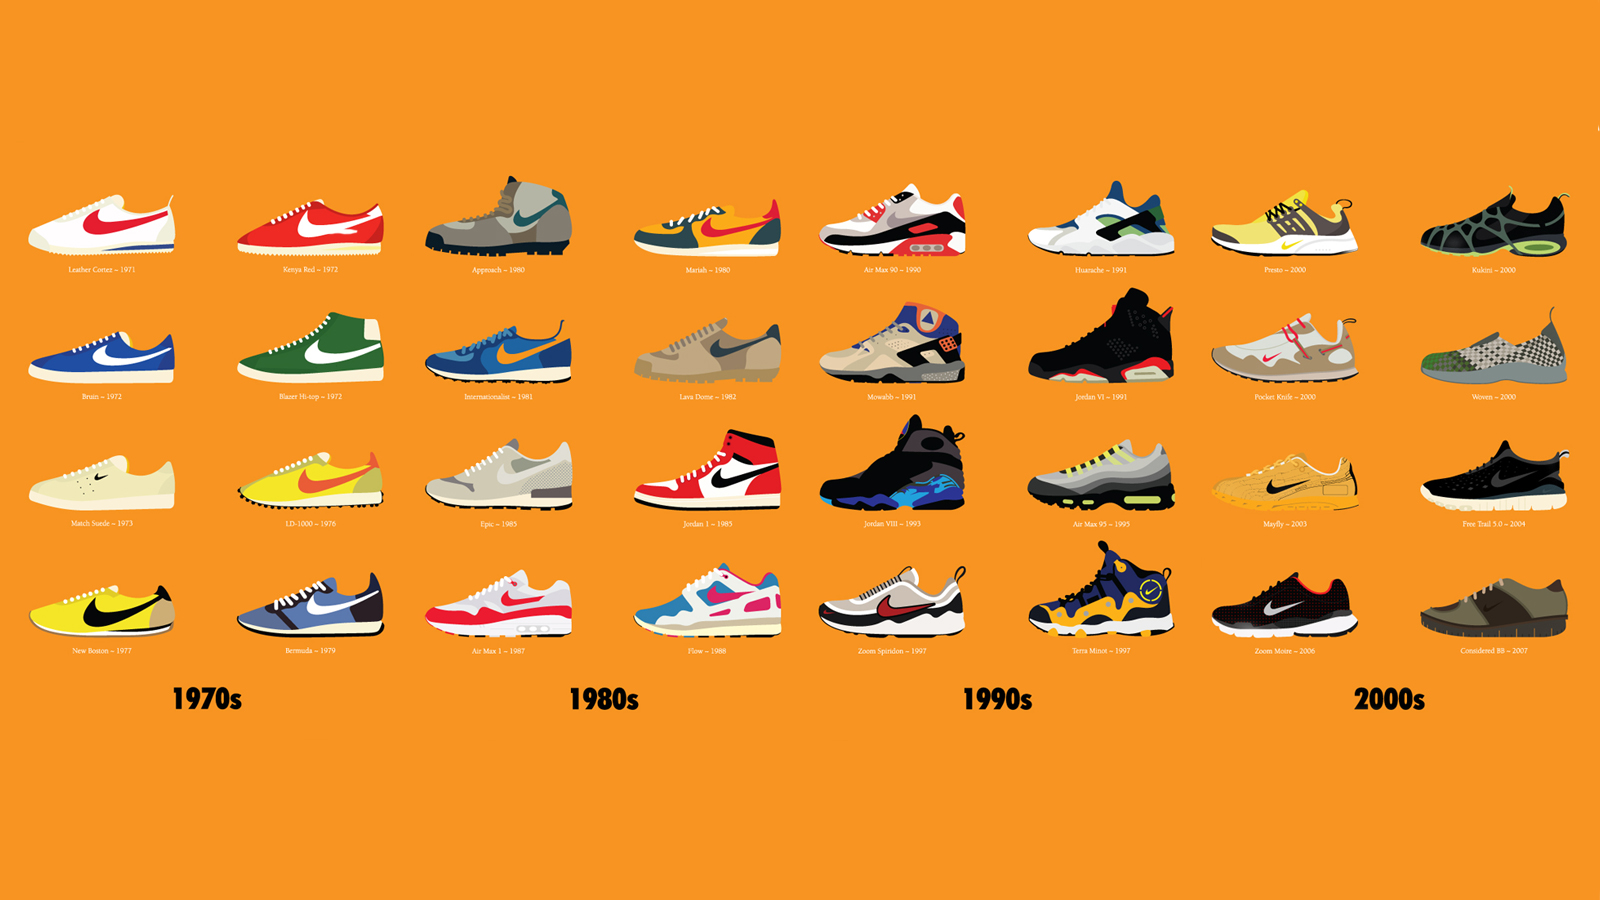 TODAYSHYPE Wallpaper 25 Wallpapers every Sneakerhead must have